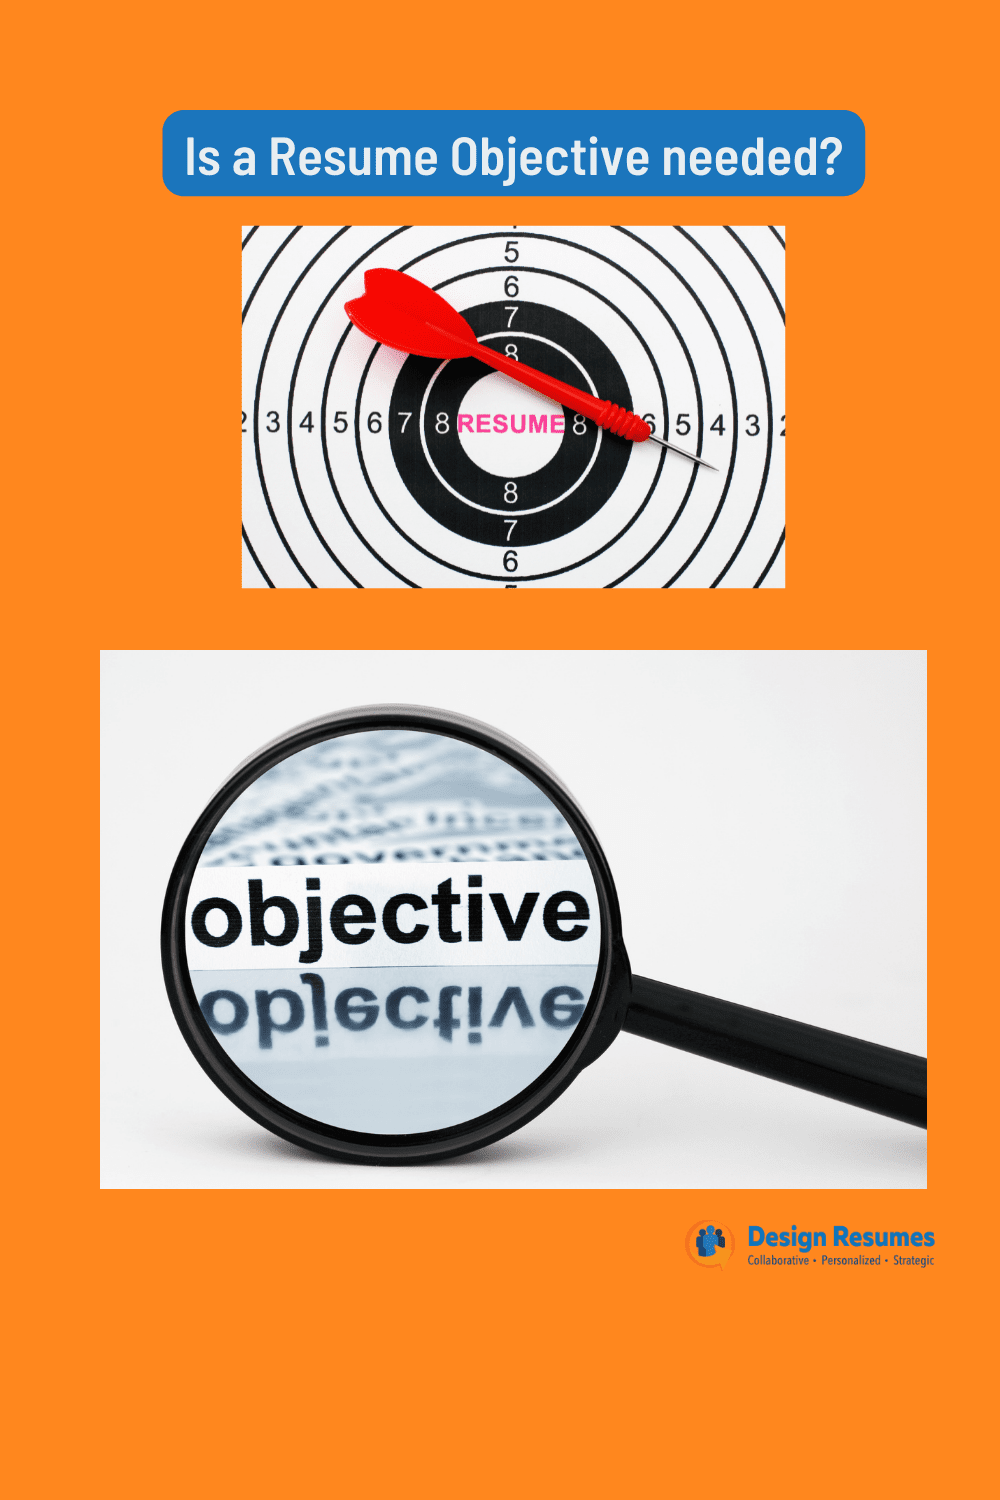 Stop putting a resume objective in your resume